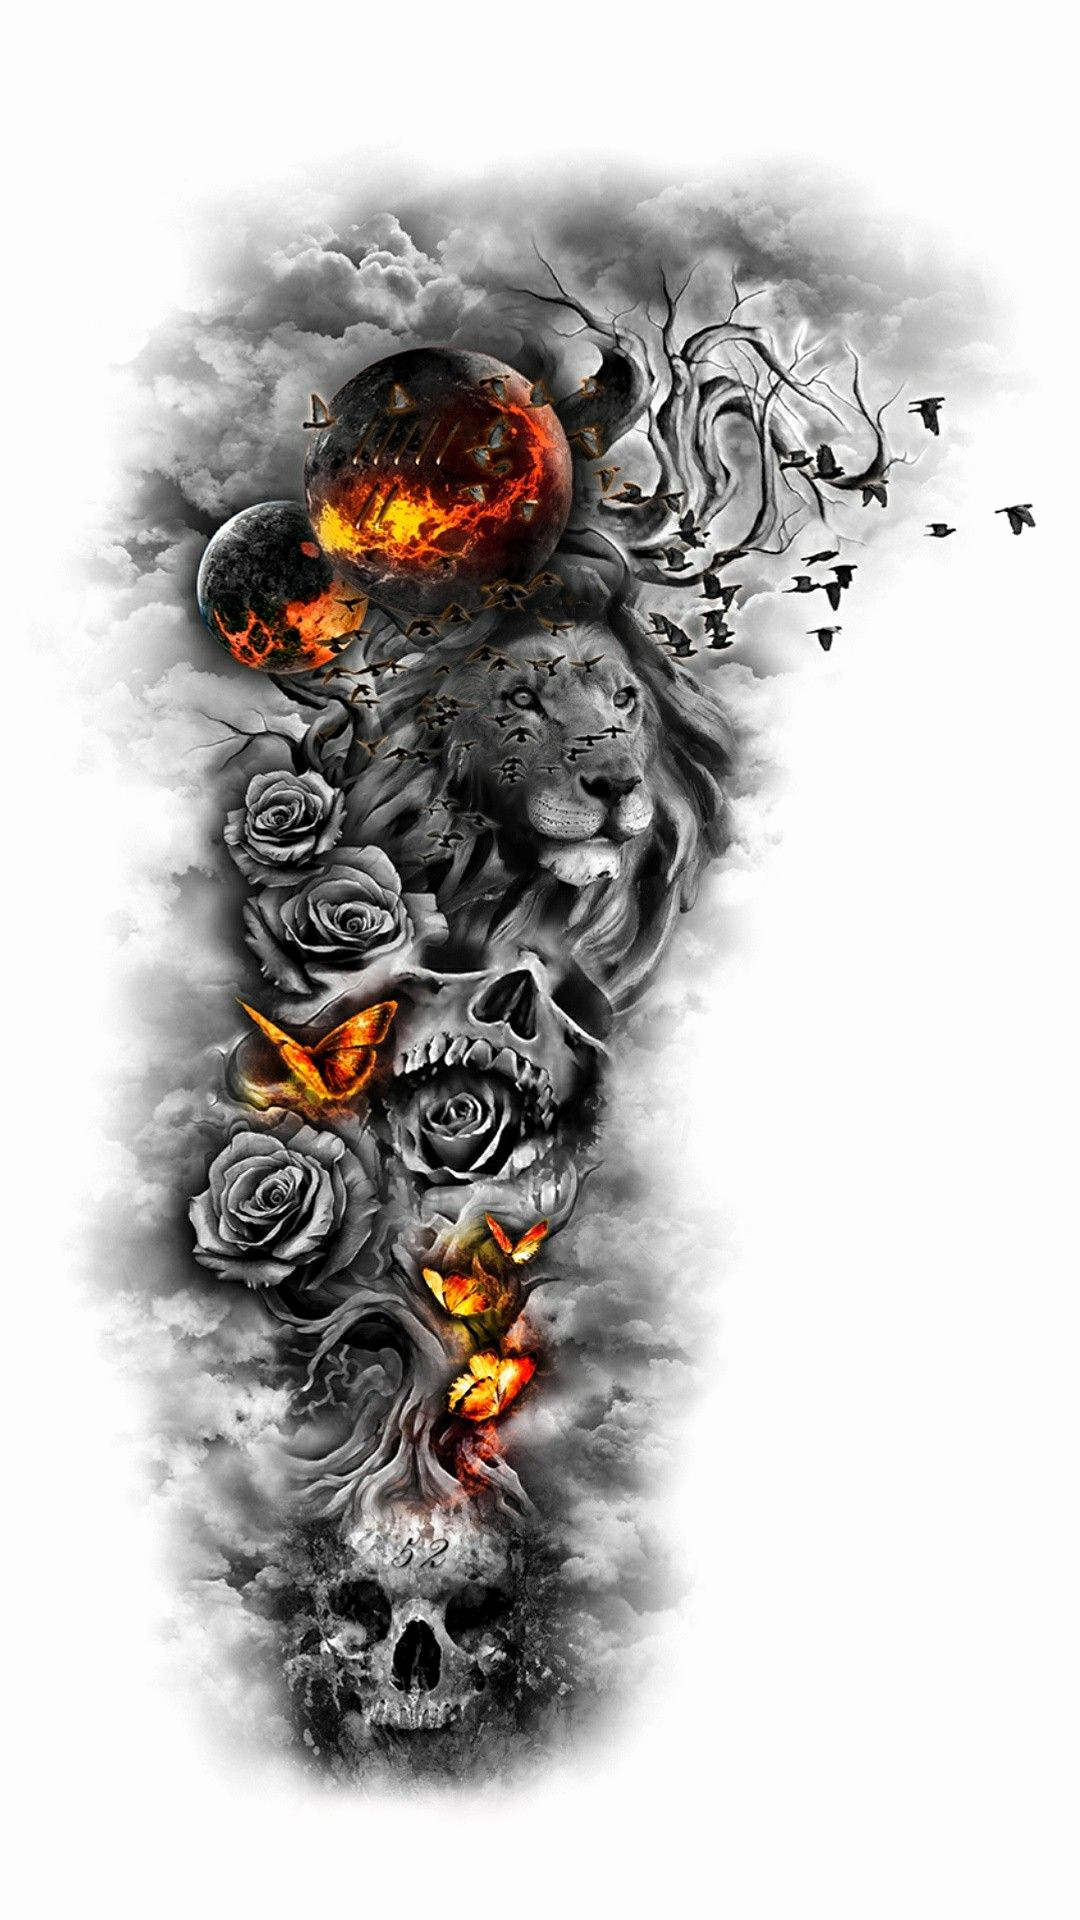 1080x1920, Skull And Roses Wallpaper New Lion Art Abstract - Lion Sleeve Tattoo Design - HD Wallpaper 